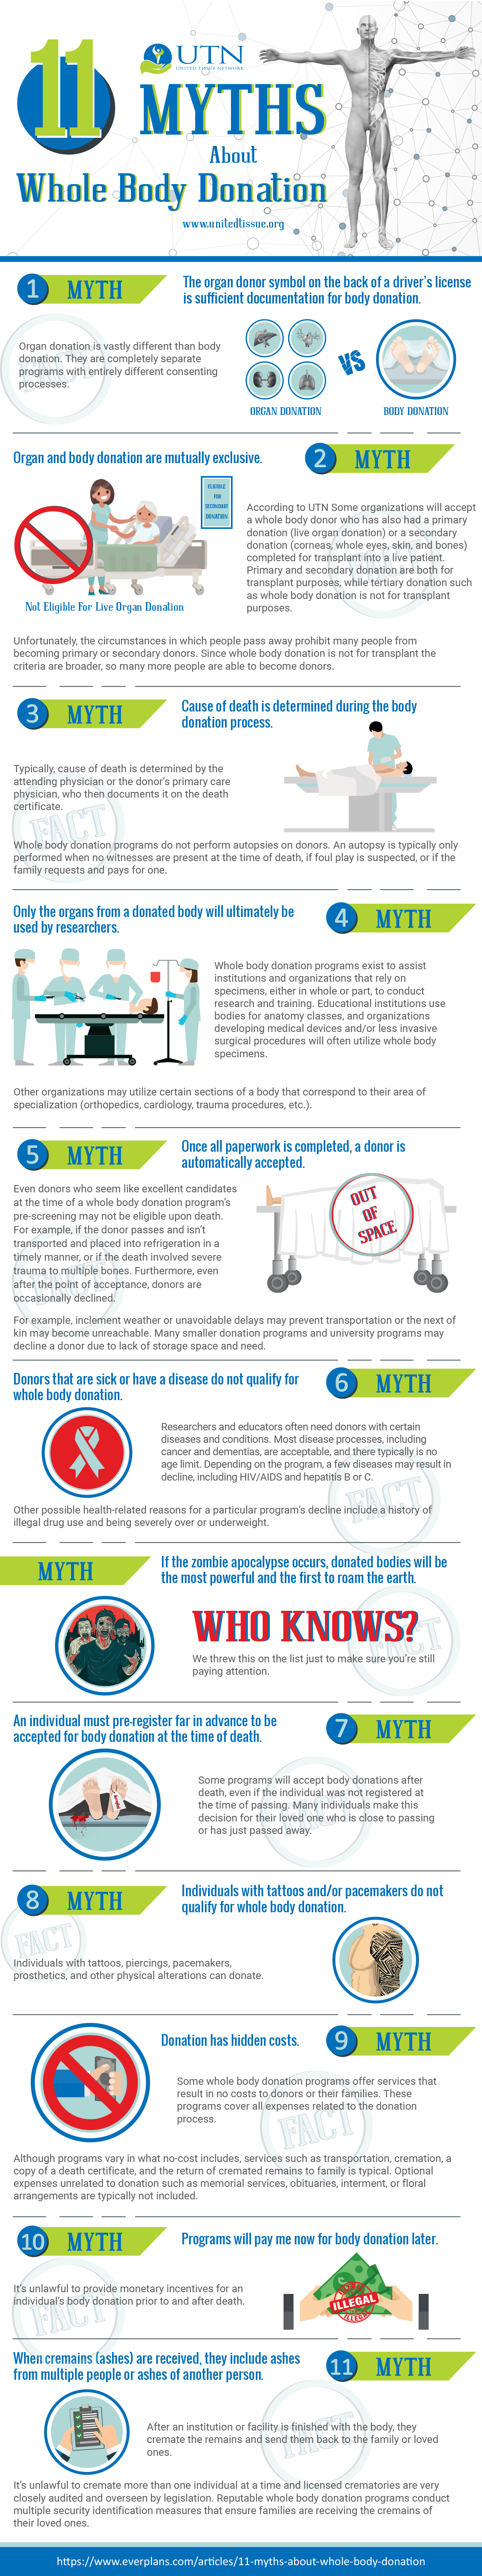 11 Myths about Whole Body Donation Infographic